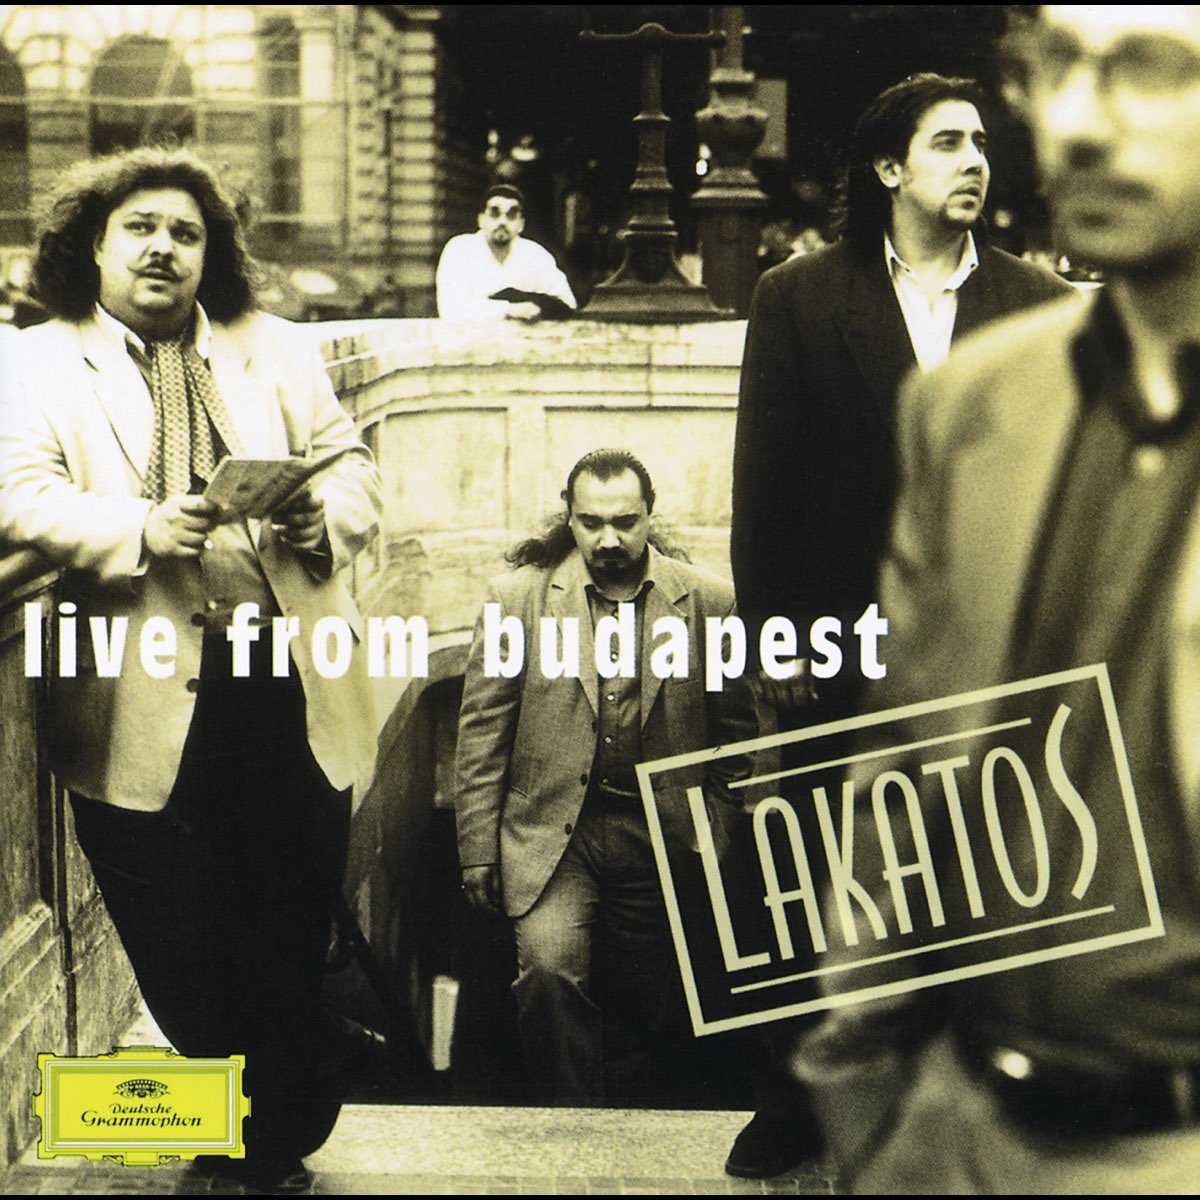 Lakatos: Live from Budapest by Roby Lakatos on Apple Music